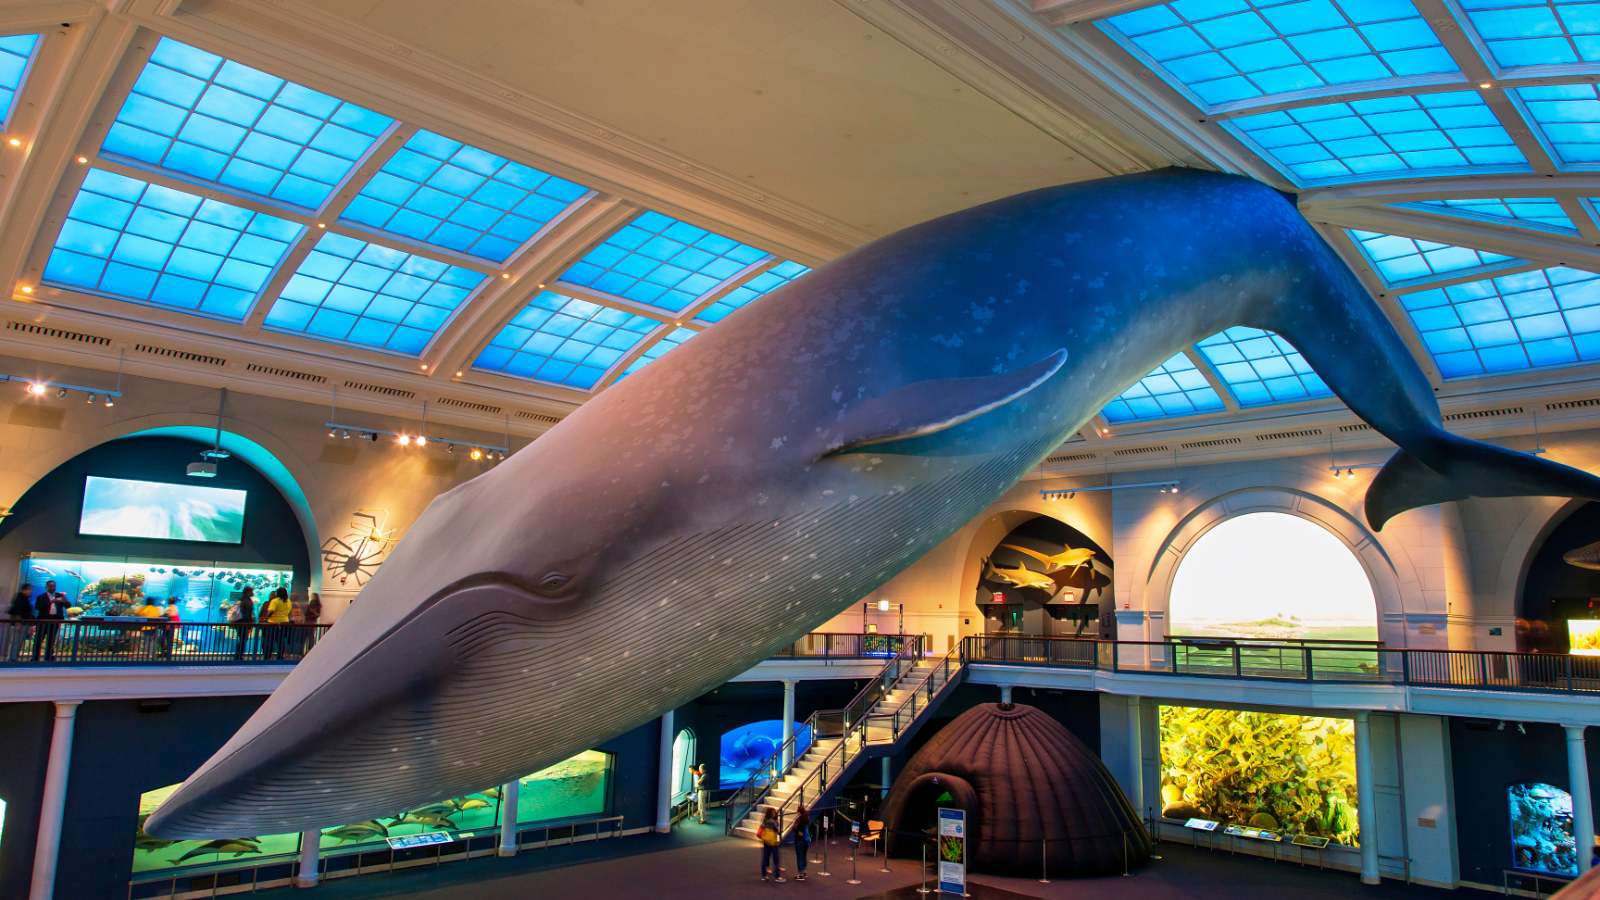 <p>One of the best museums this country has to offer, the American Museum of Natural History in New York City is a must-see. Opened in 1869, the museum used to be located in Central Park when the first exhibits opened in 1871. In 1964, more than $400,000 worth of jewels were stolen from the museum, making it one of the most interesting facts about the museum.</p>